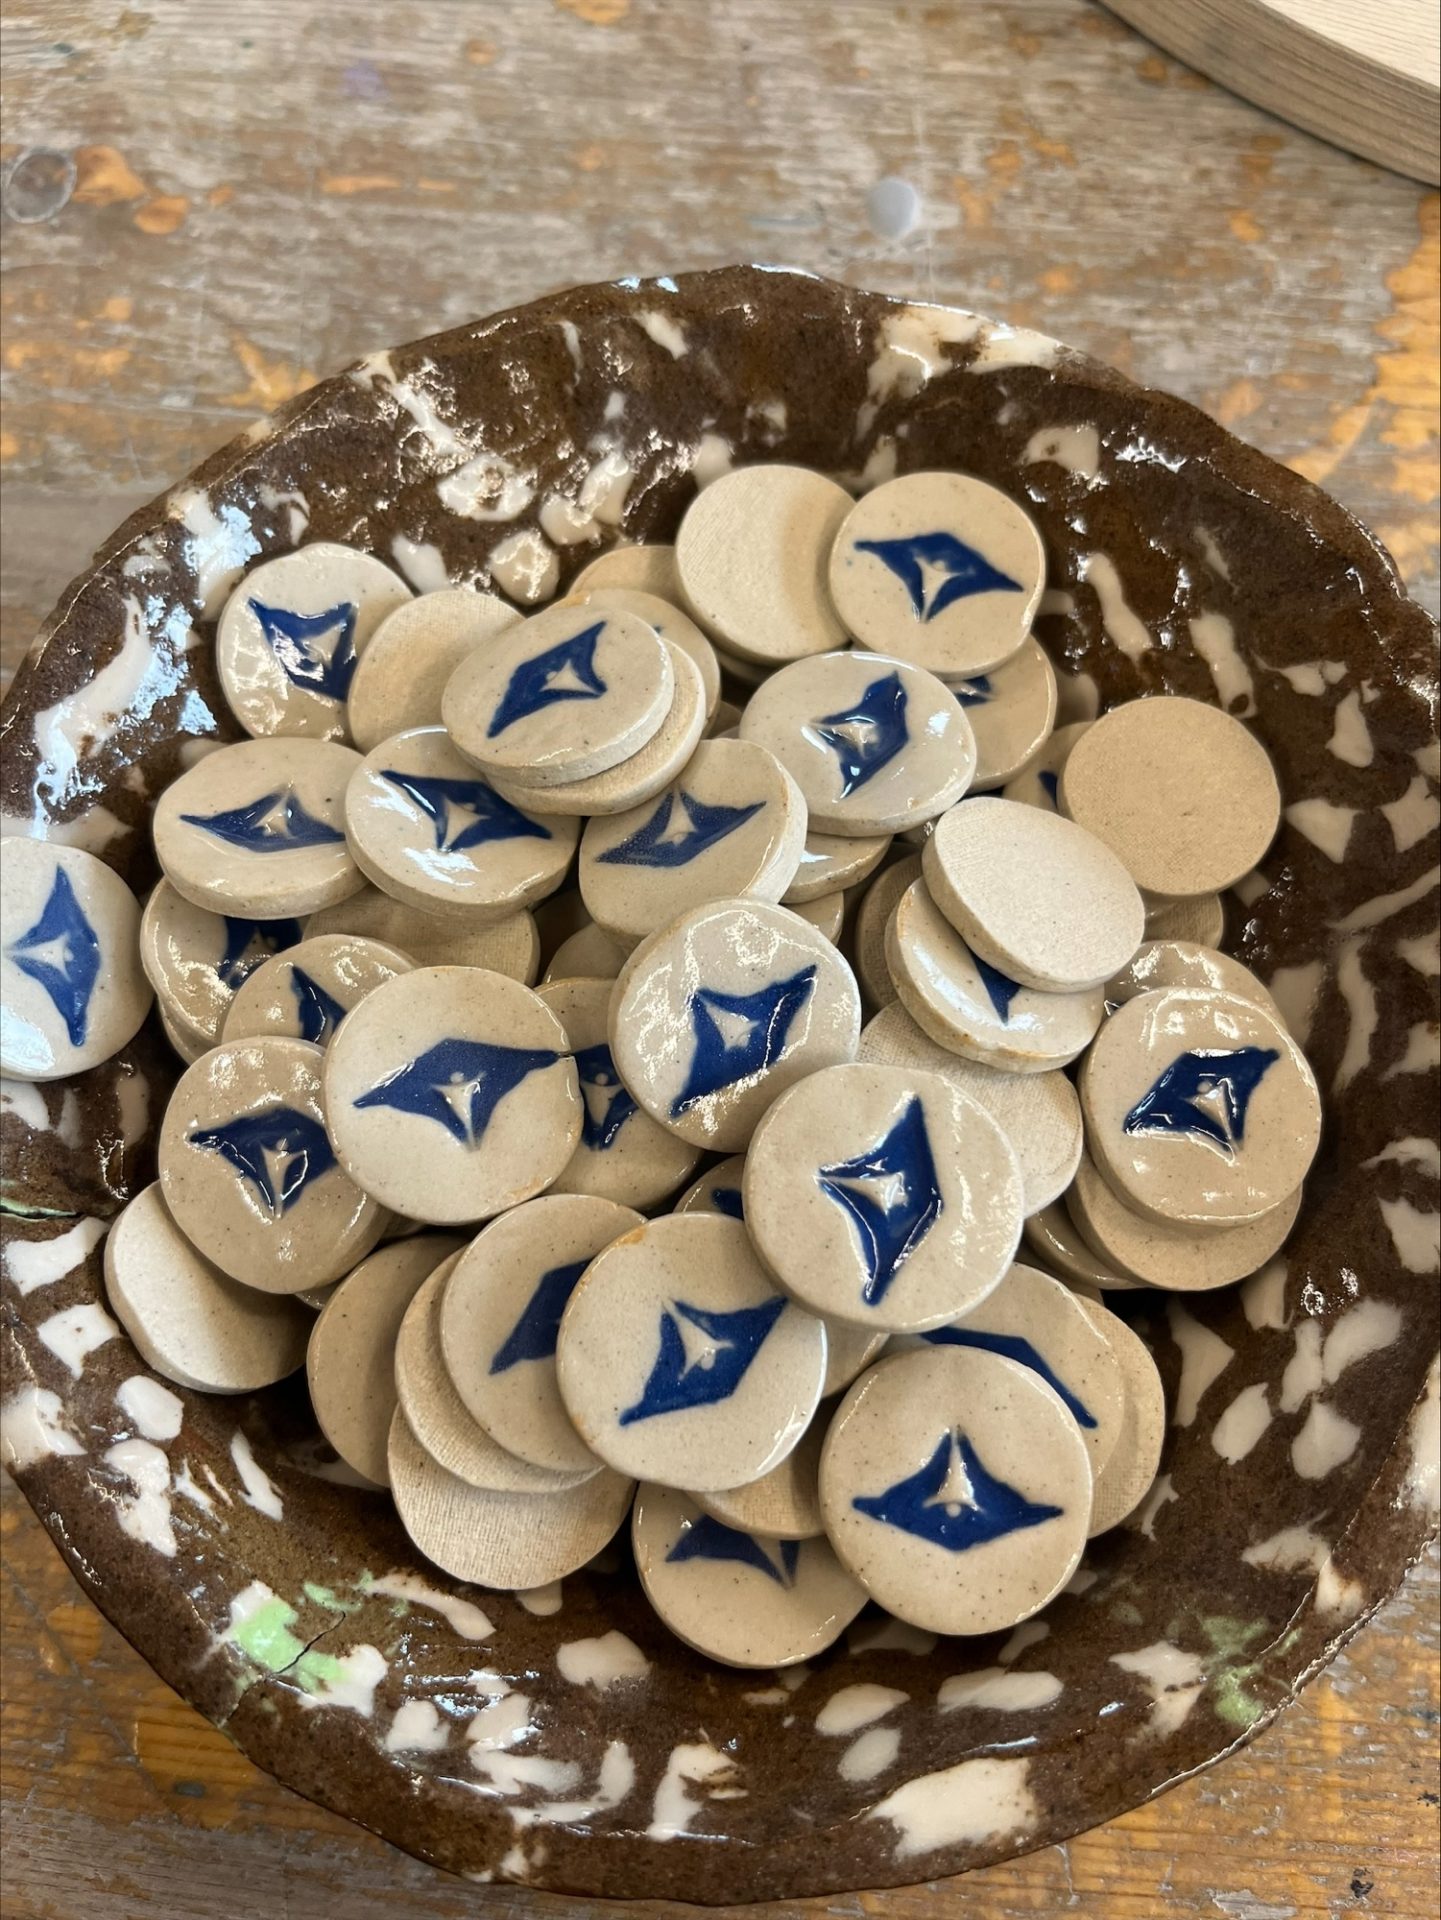 Badges in a Bowl ready for their Backs